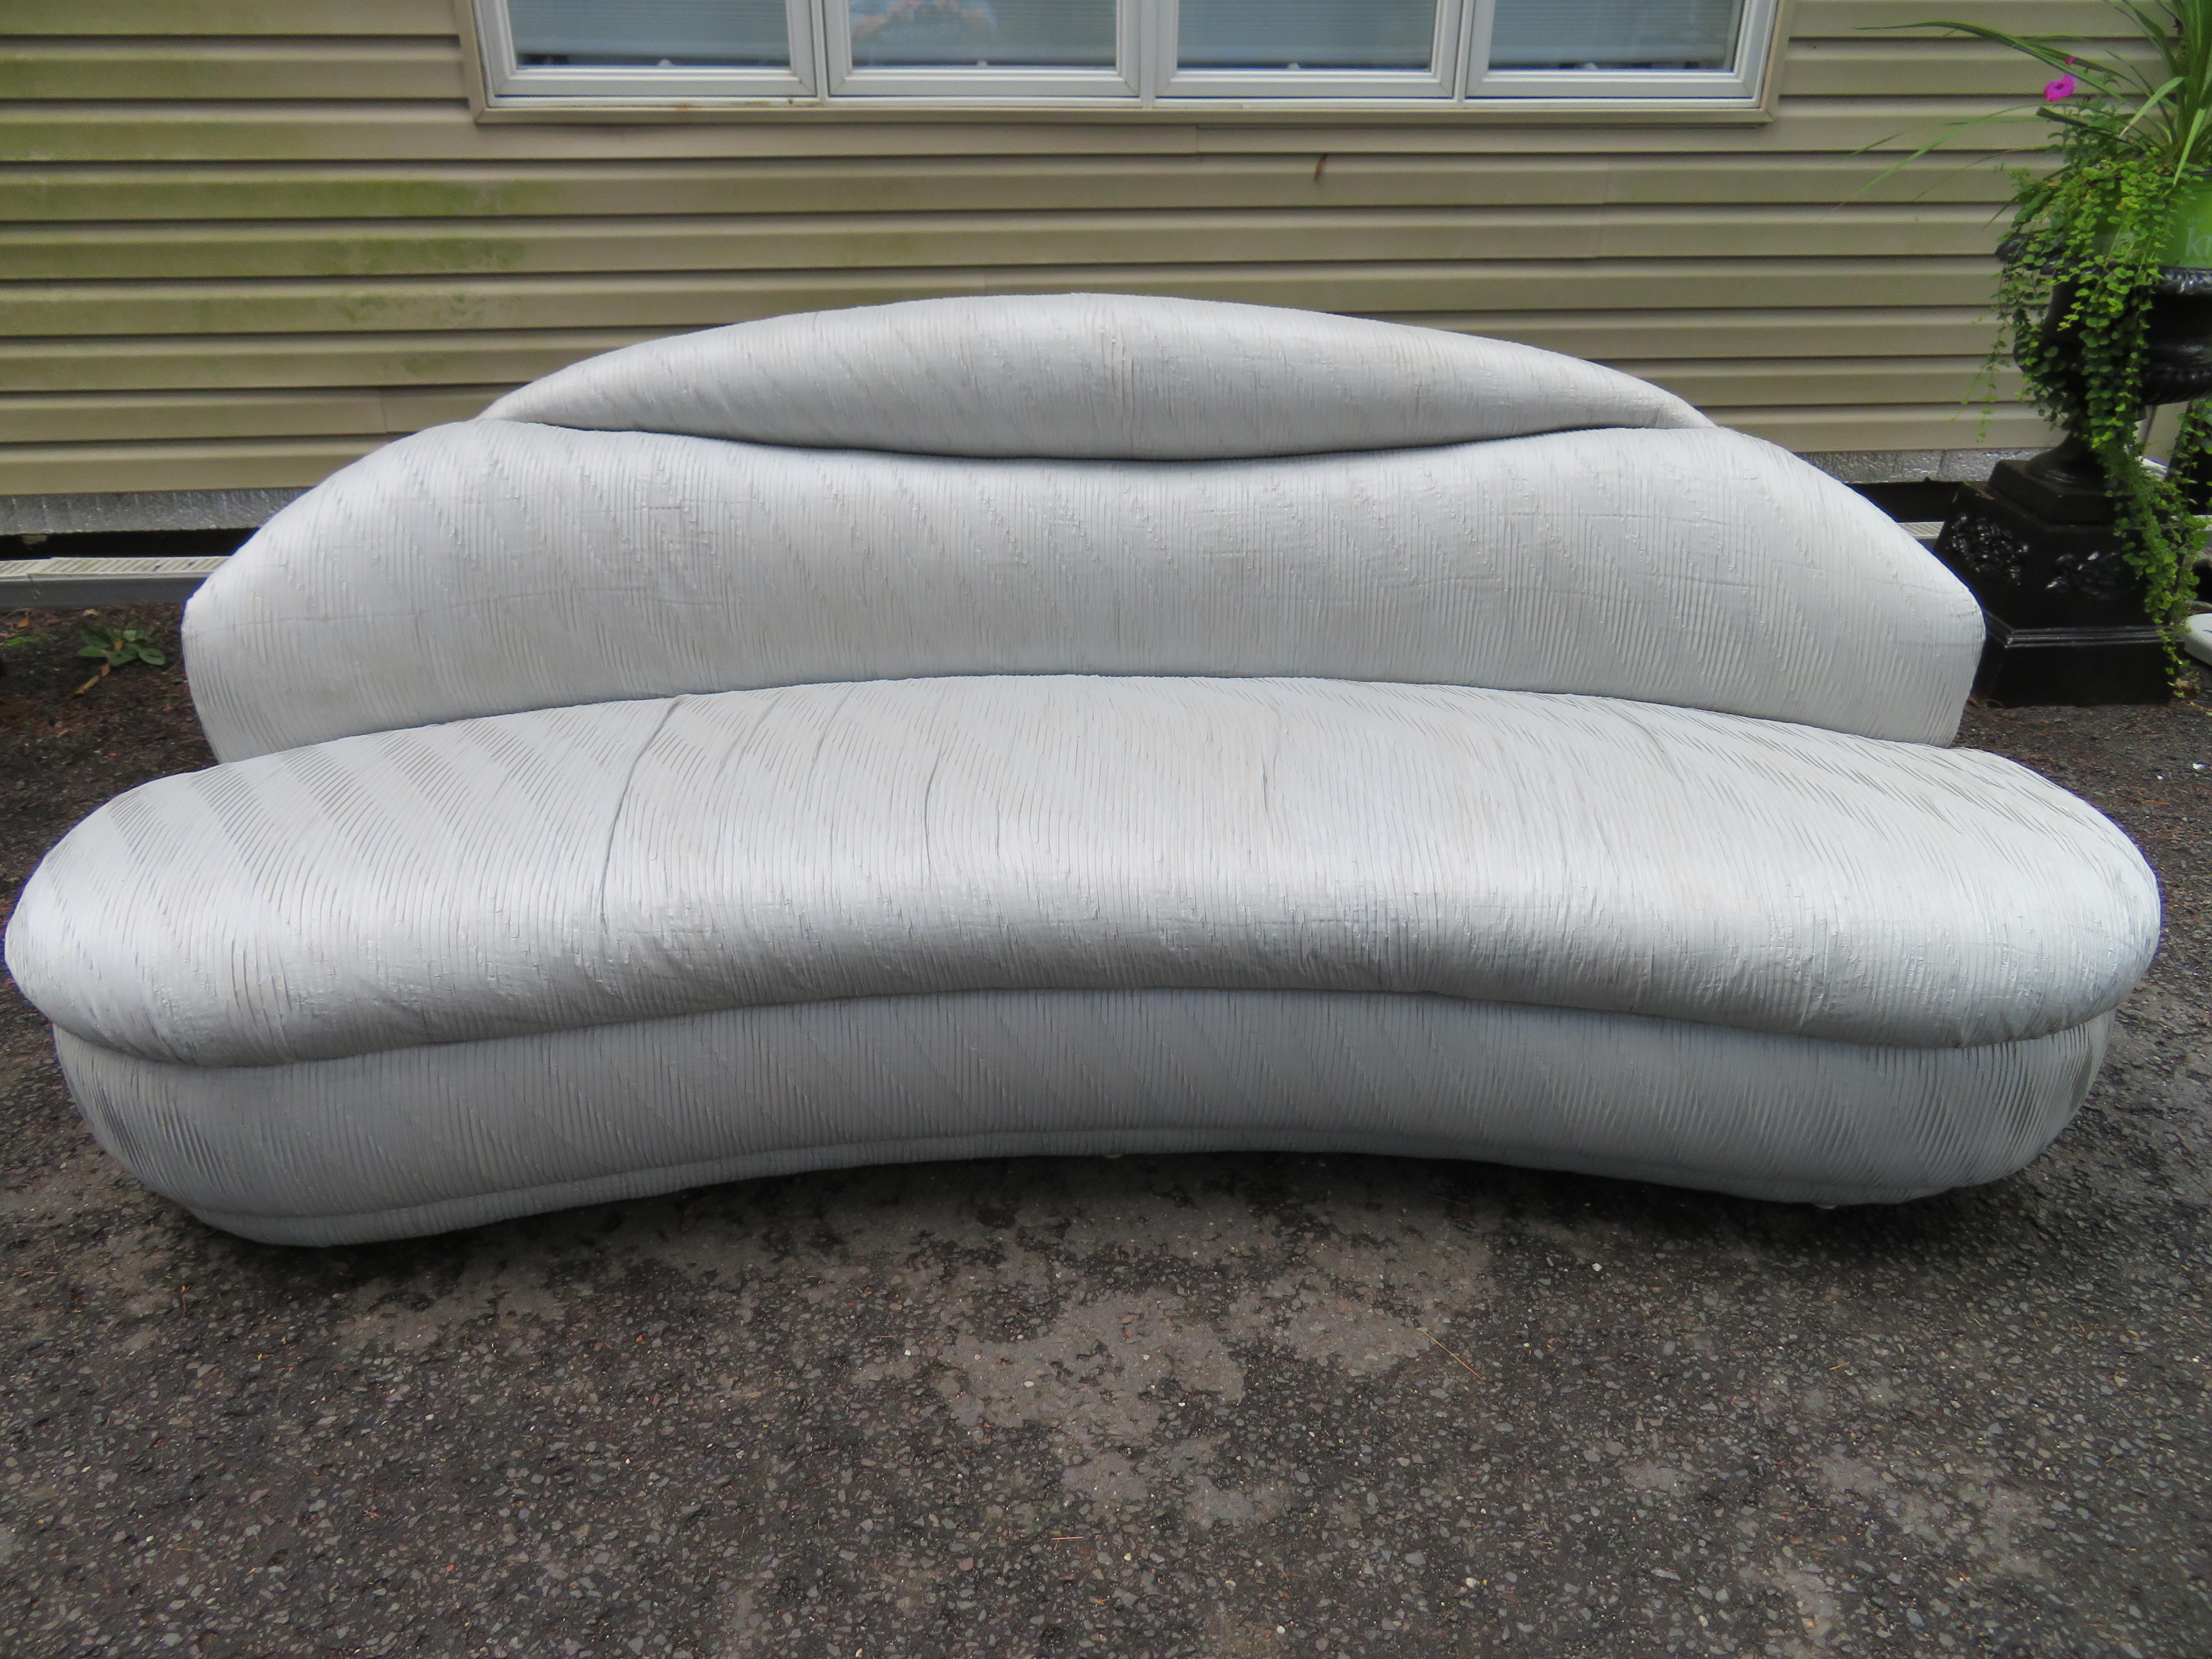 Unusual pair of Weiman kidney shaped curved sofas-Vladimir Kagan style. We especially love the original ruched fabric in a soft grey-very KWID indeed! The fabric does have a bit of wear so new upholstery is recommended but we would redo the ruched